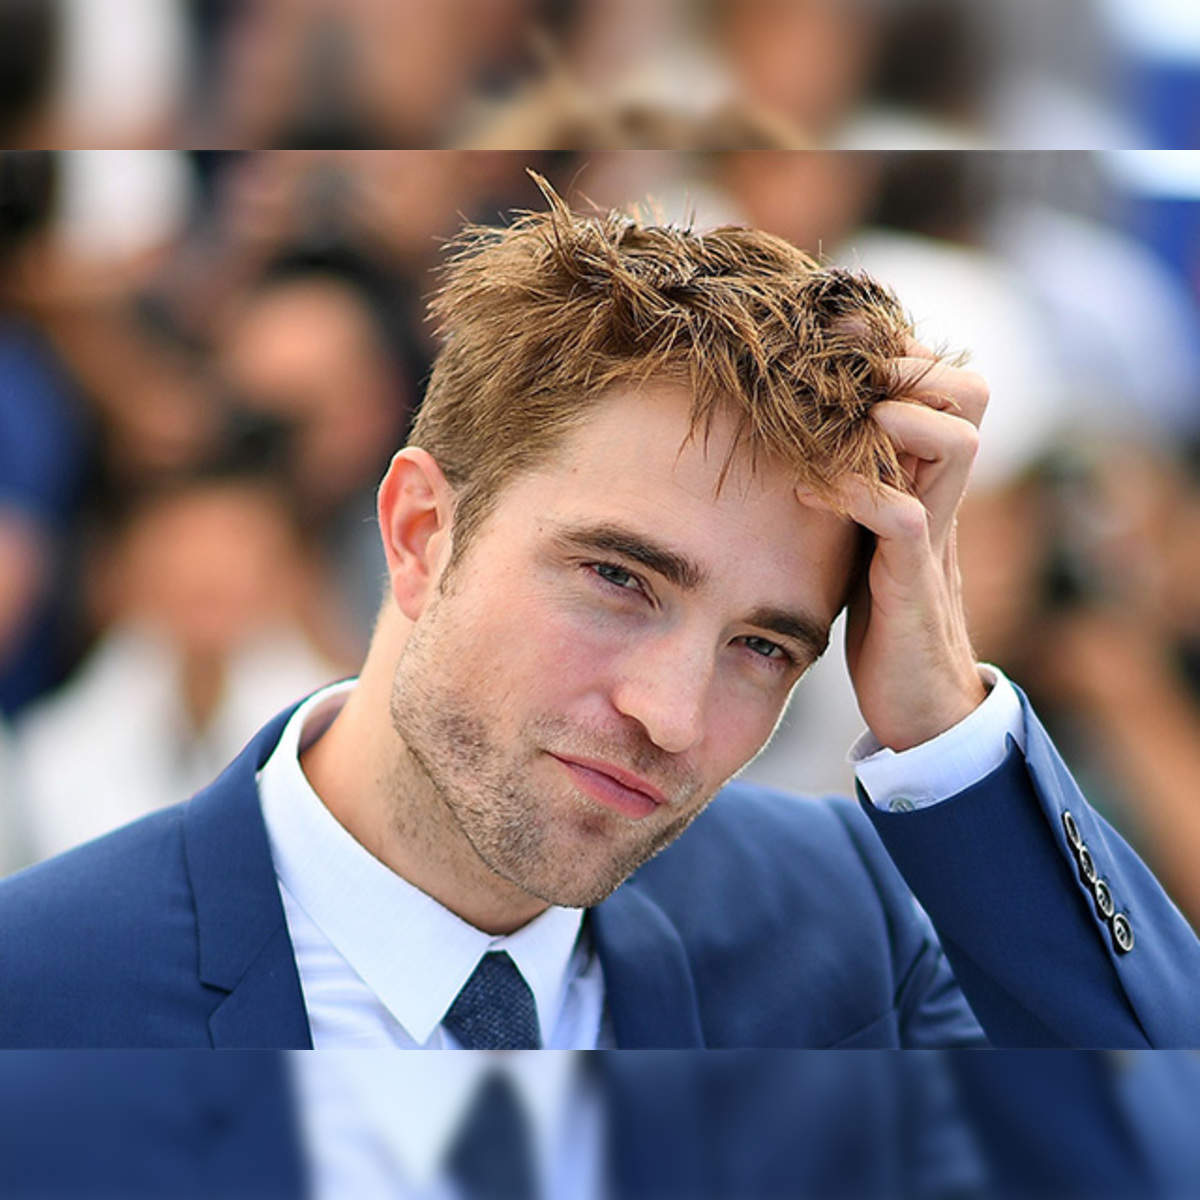 Paramount Press Express | ACTOR ROBERT PATTINSON TELLS “CBS SUNDAY MORNING”  HE LIKES HAVING A JOB THAT ALLOWS HIM TO “CONSISTENTLY BREAK THE WALLS” OF  THE BOX AROUND HIM